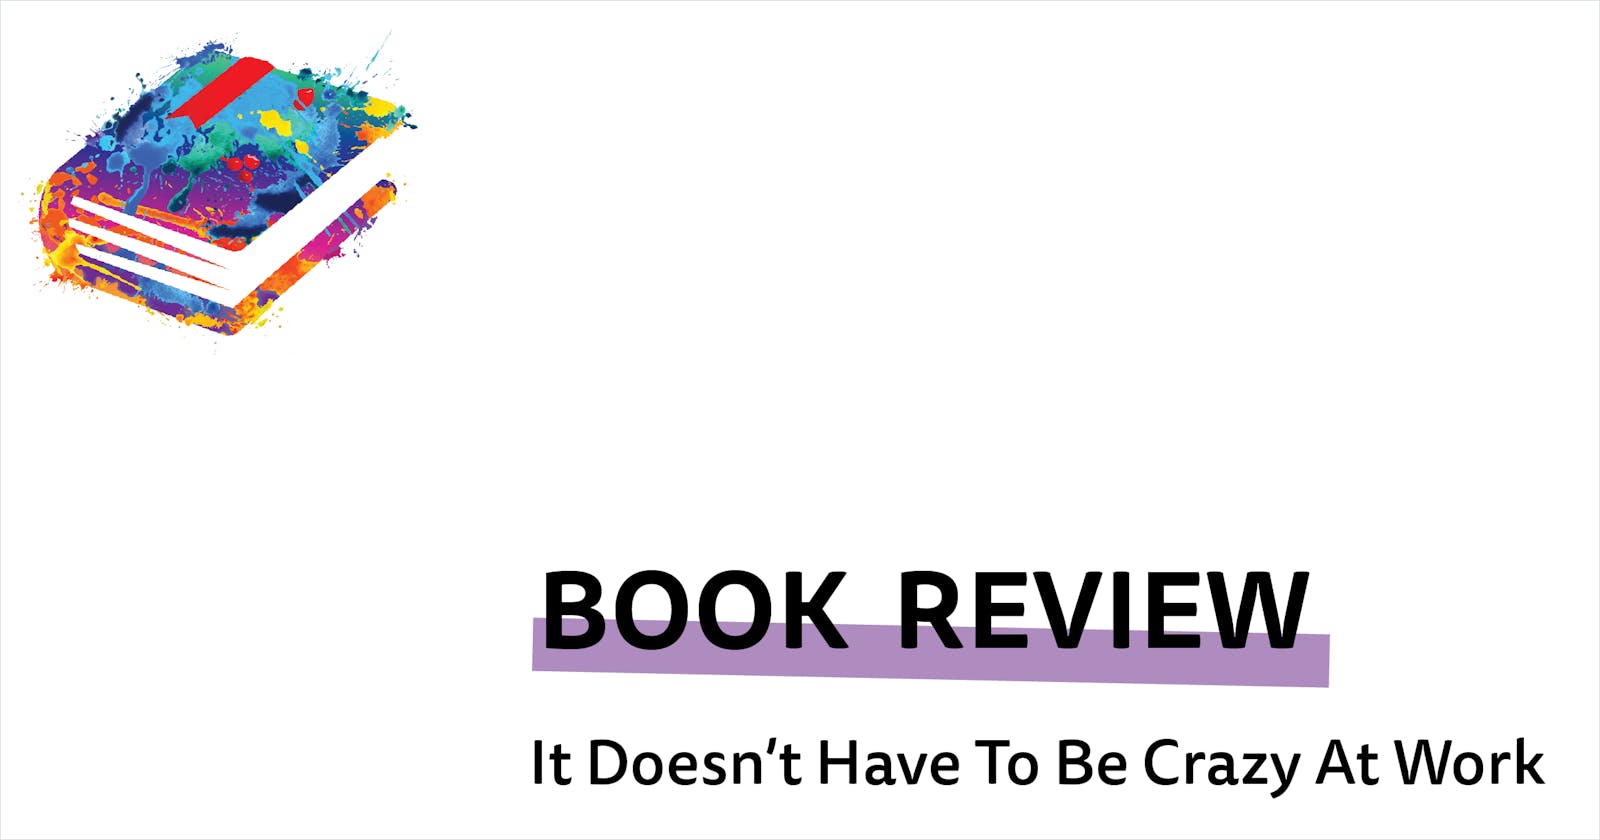 Book Review: It Doesn't Have To Be Crazy At Work